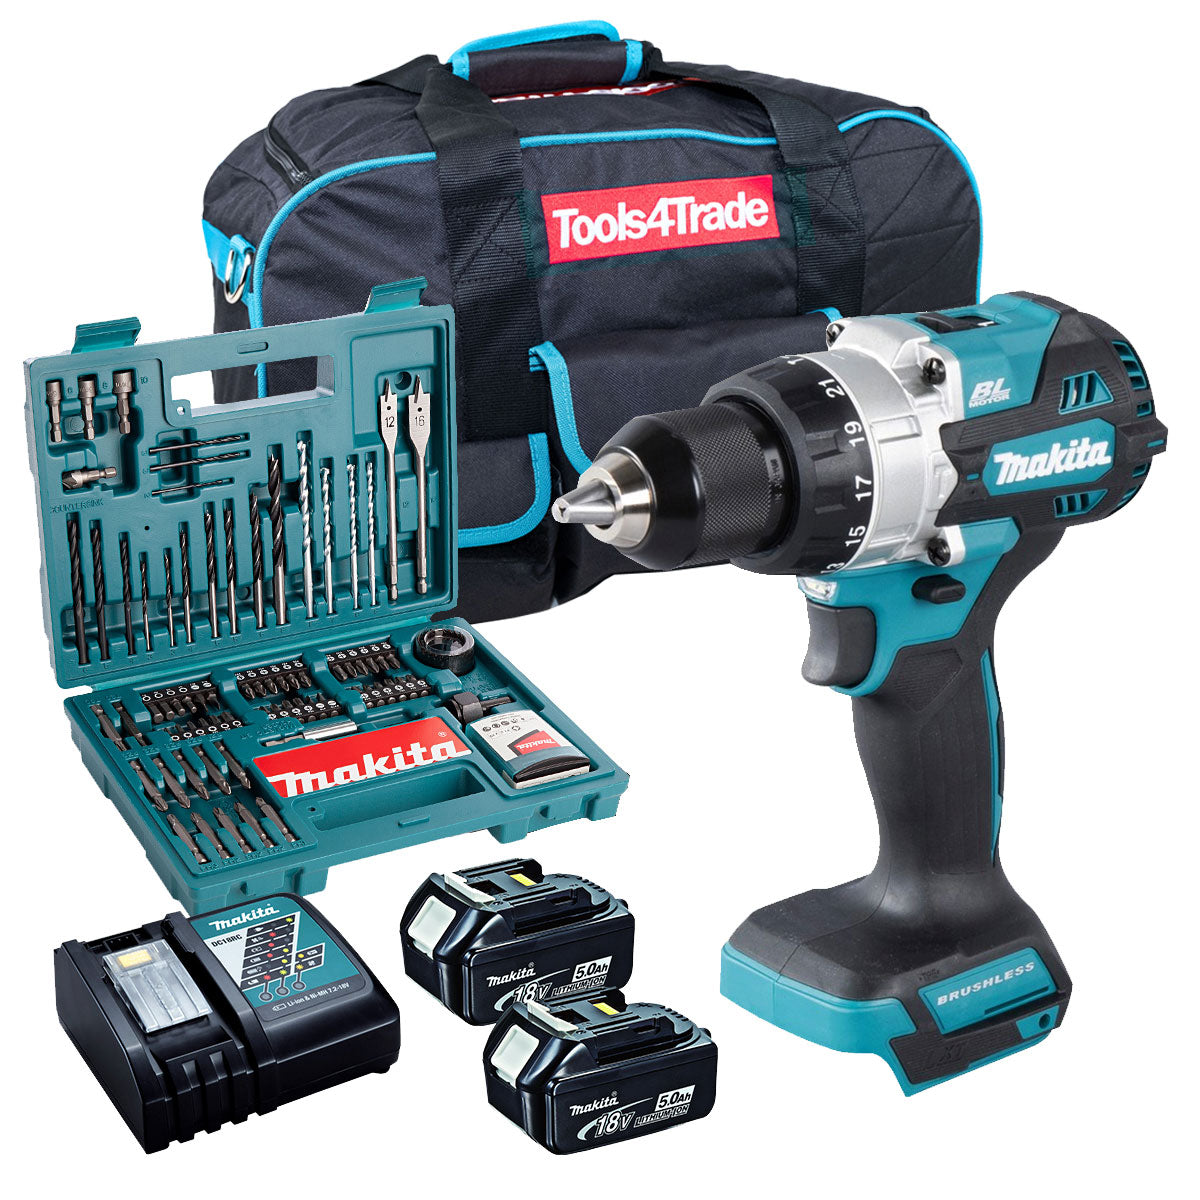 Makita DHP486Z 18V Brushless Combi Drill with 2 x 5.0Ah Battery + Charger + Accessories & Tool Bag